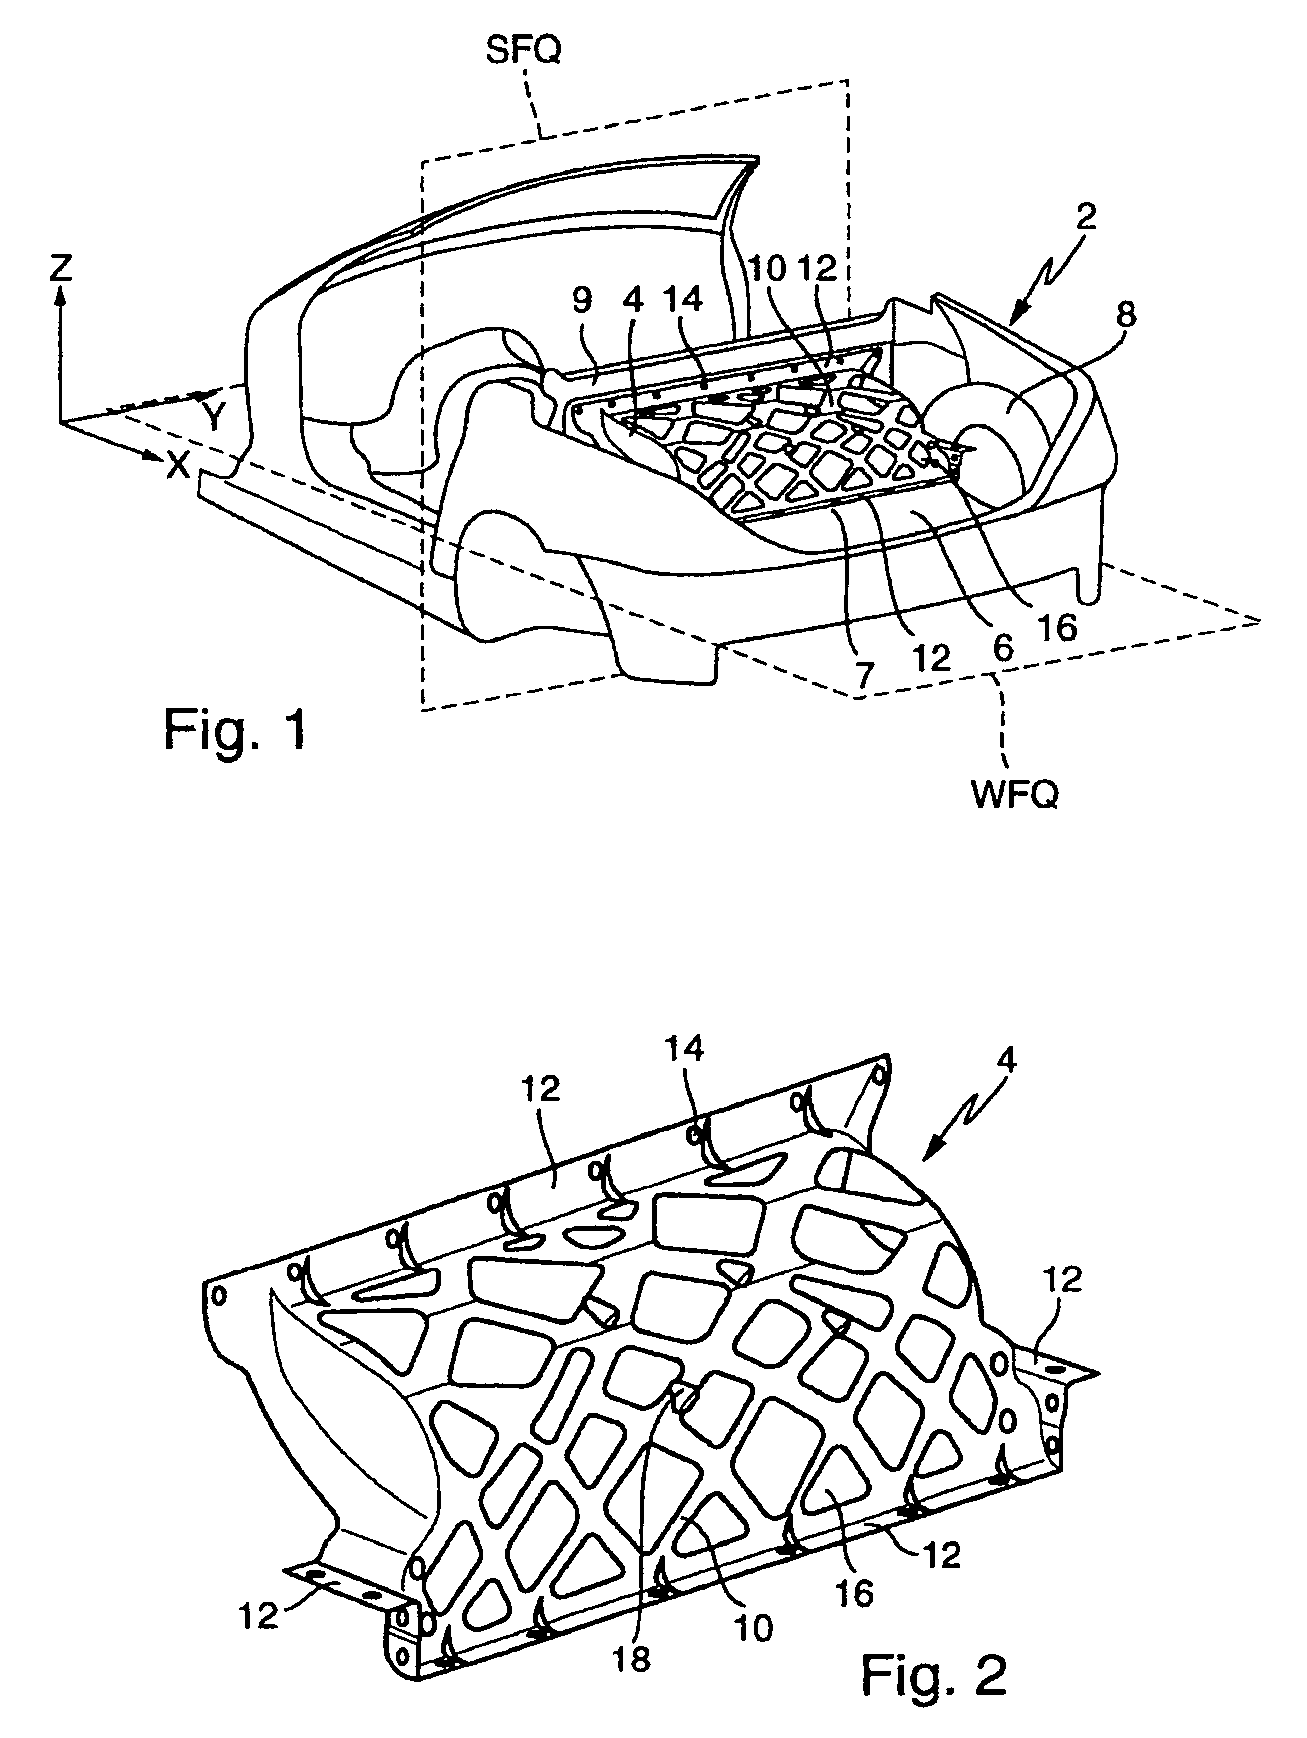 Separating device for the bodywork of a vehicle